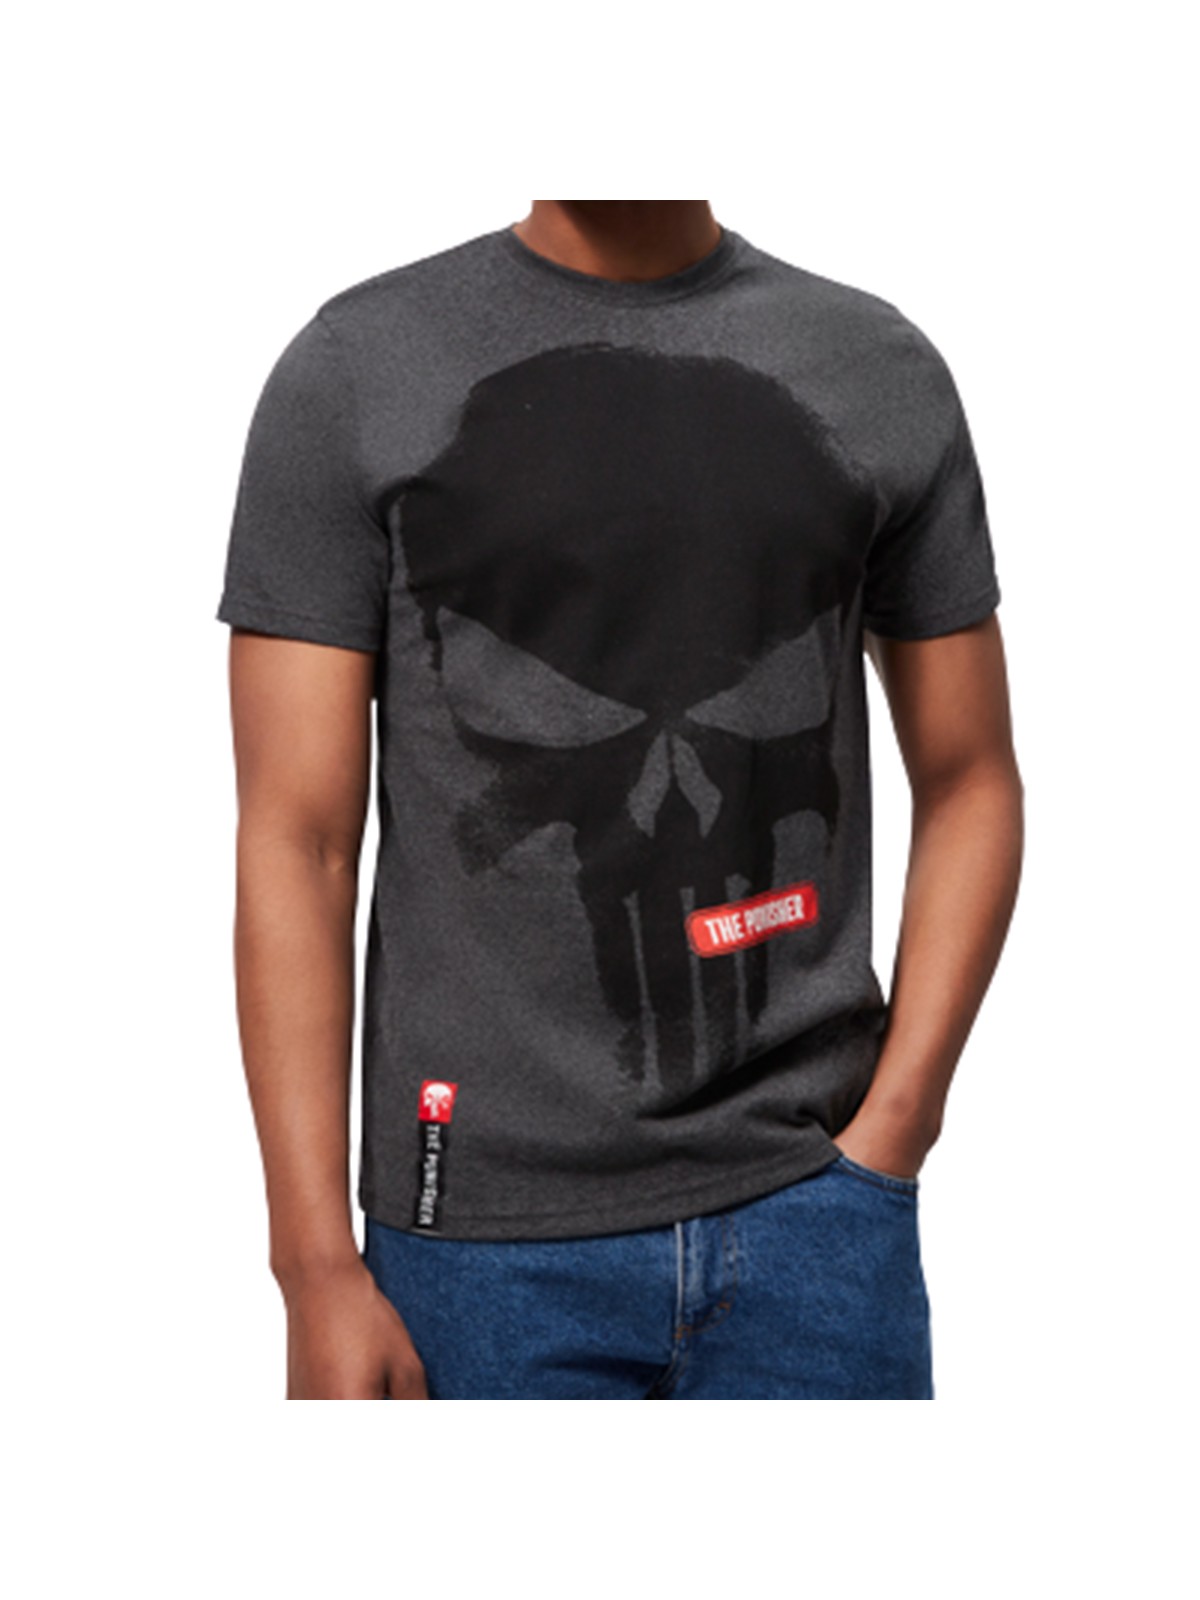 T-shirt The Punisher Homme